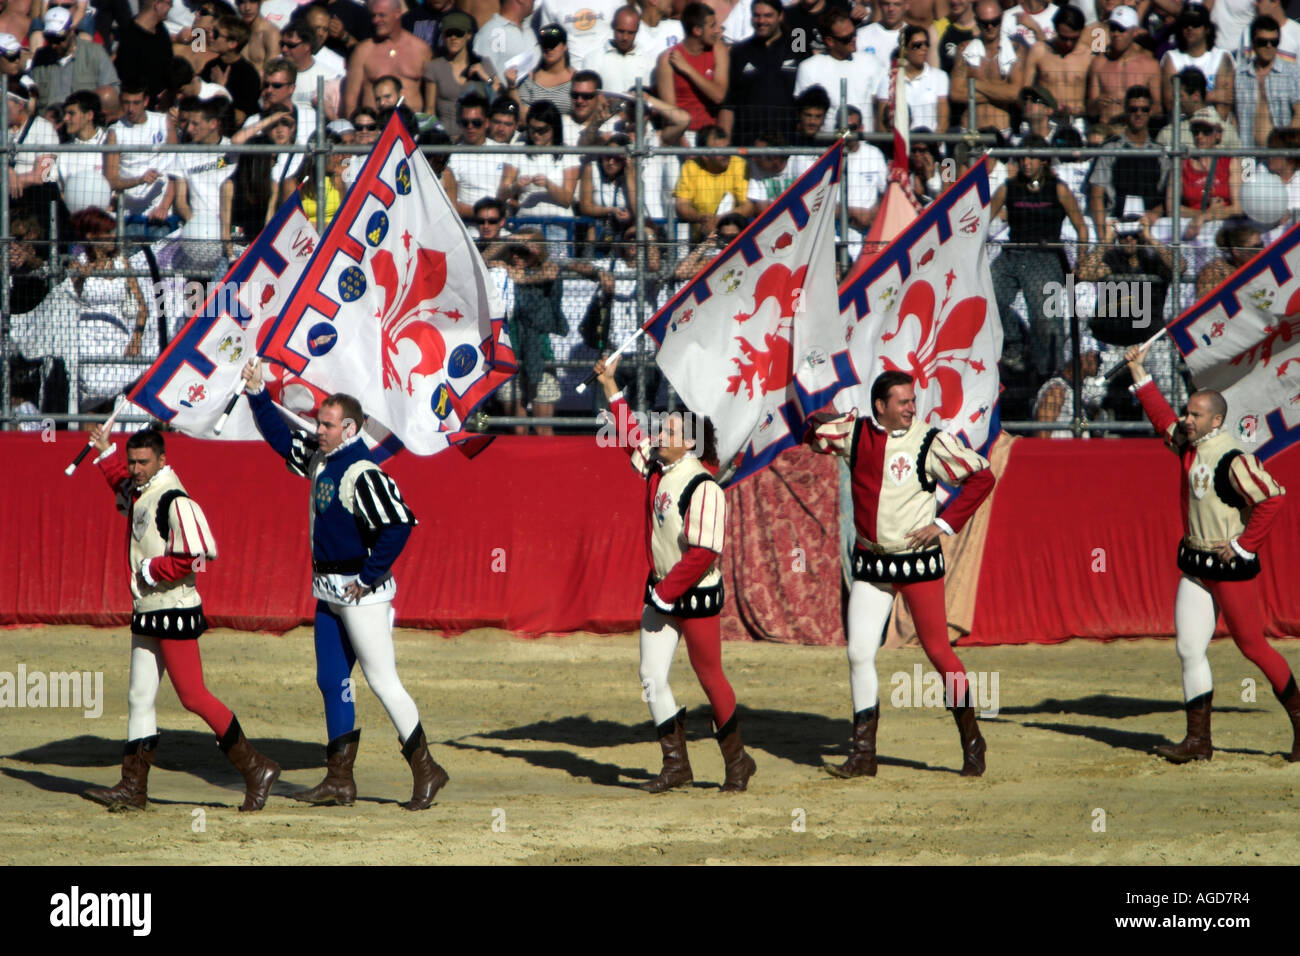 The Flagmen of the Calcio Storico parade in the Piazza Santa Croce, Florence, Italy Stock Photo